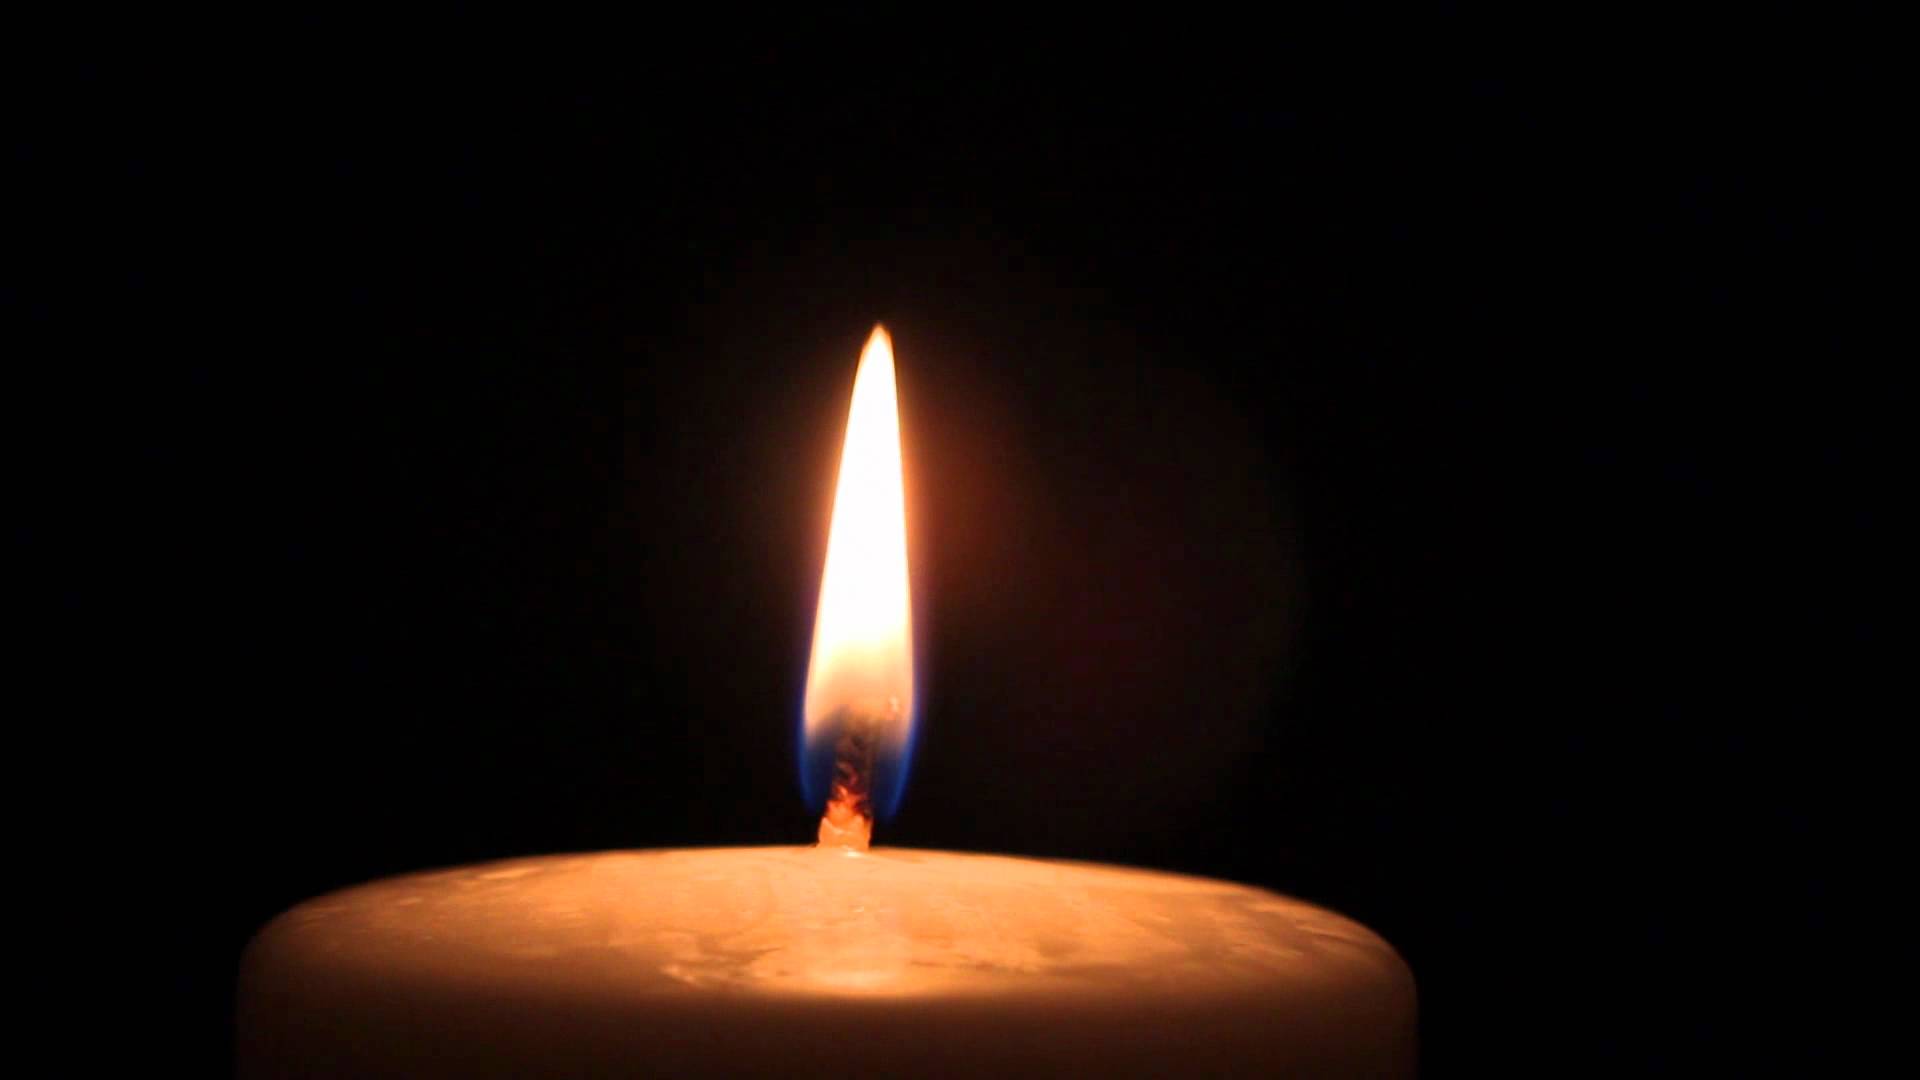 Candle Light - Macro Lens [Royalty-Free Stock Footage] - YouTube